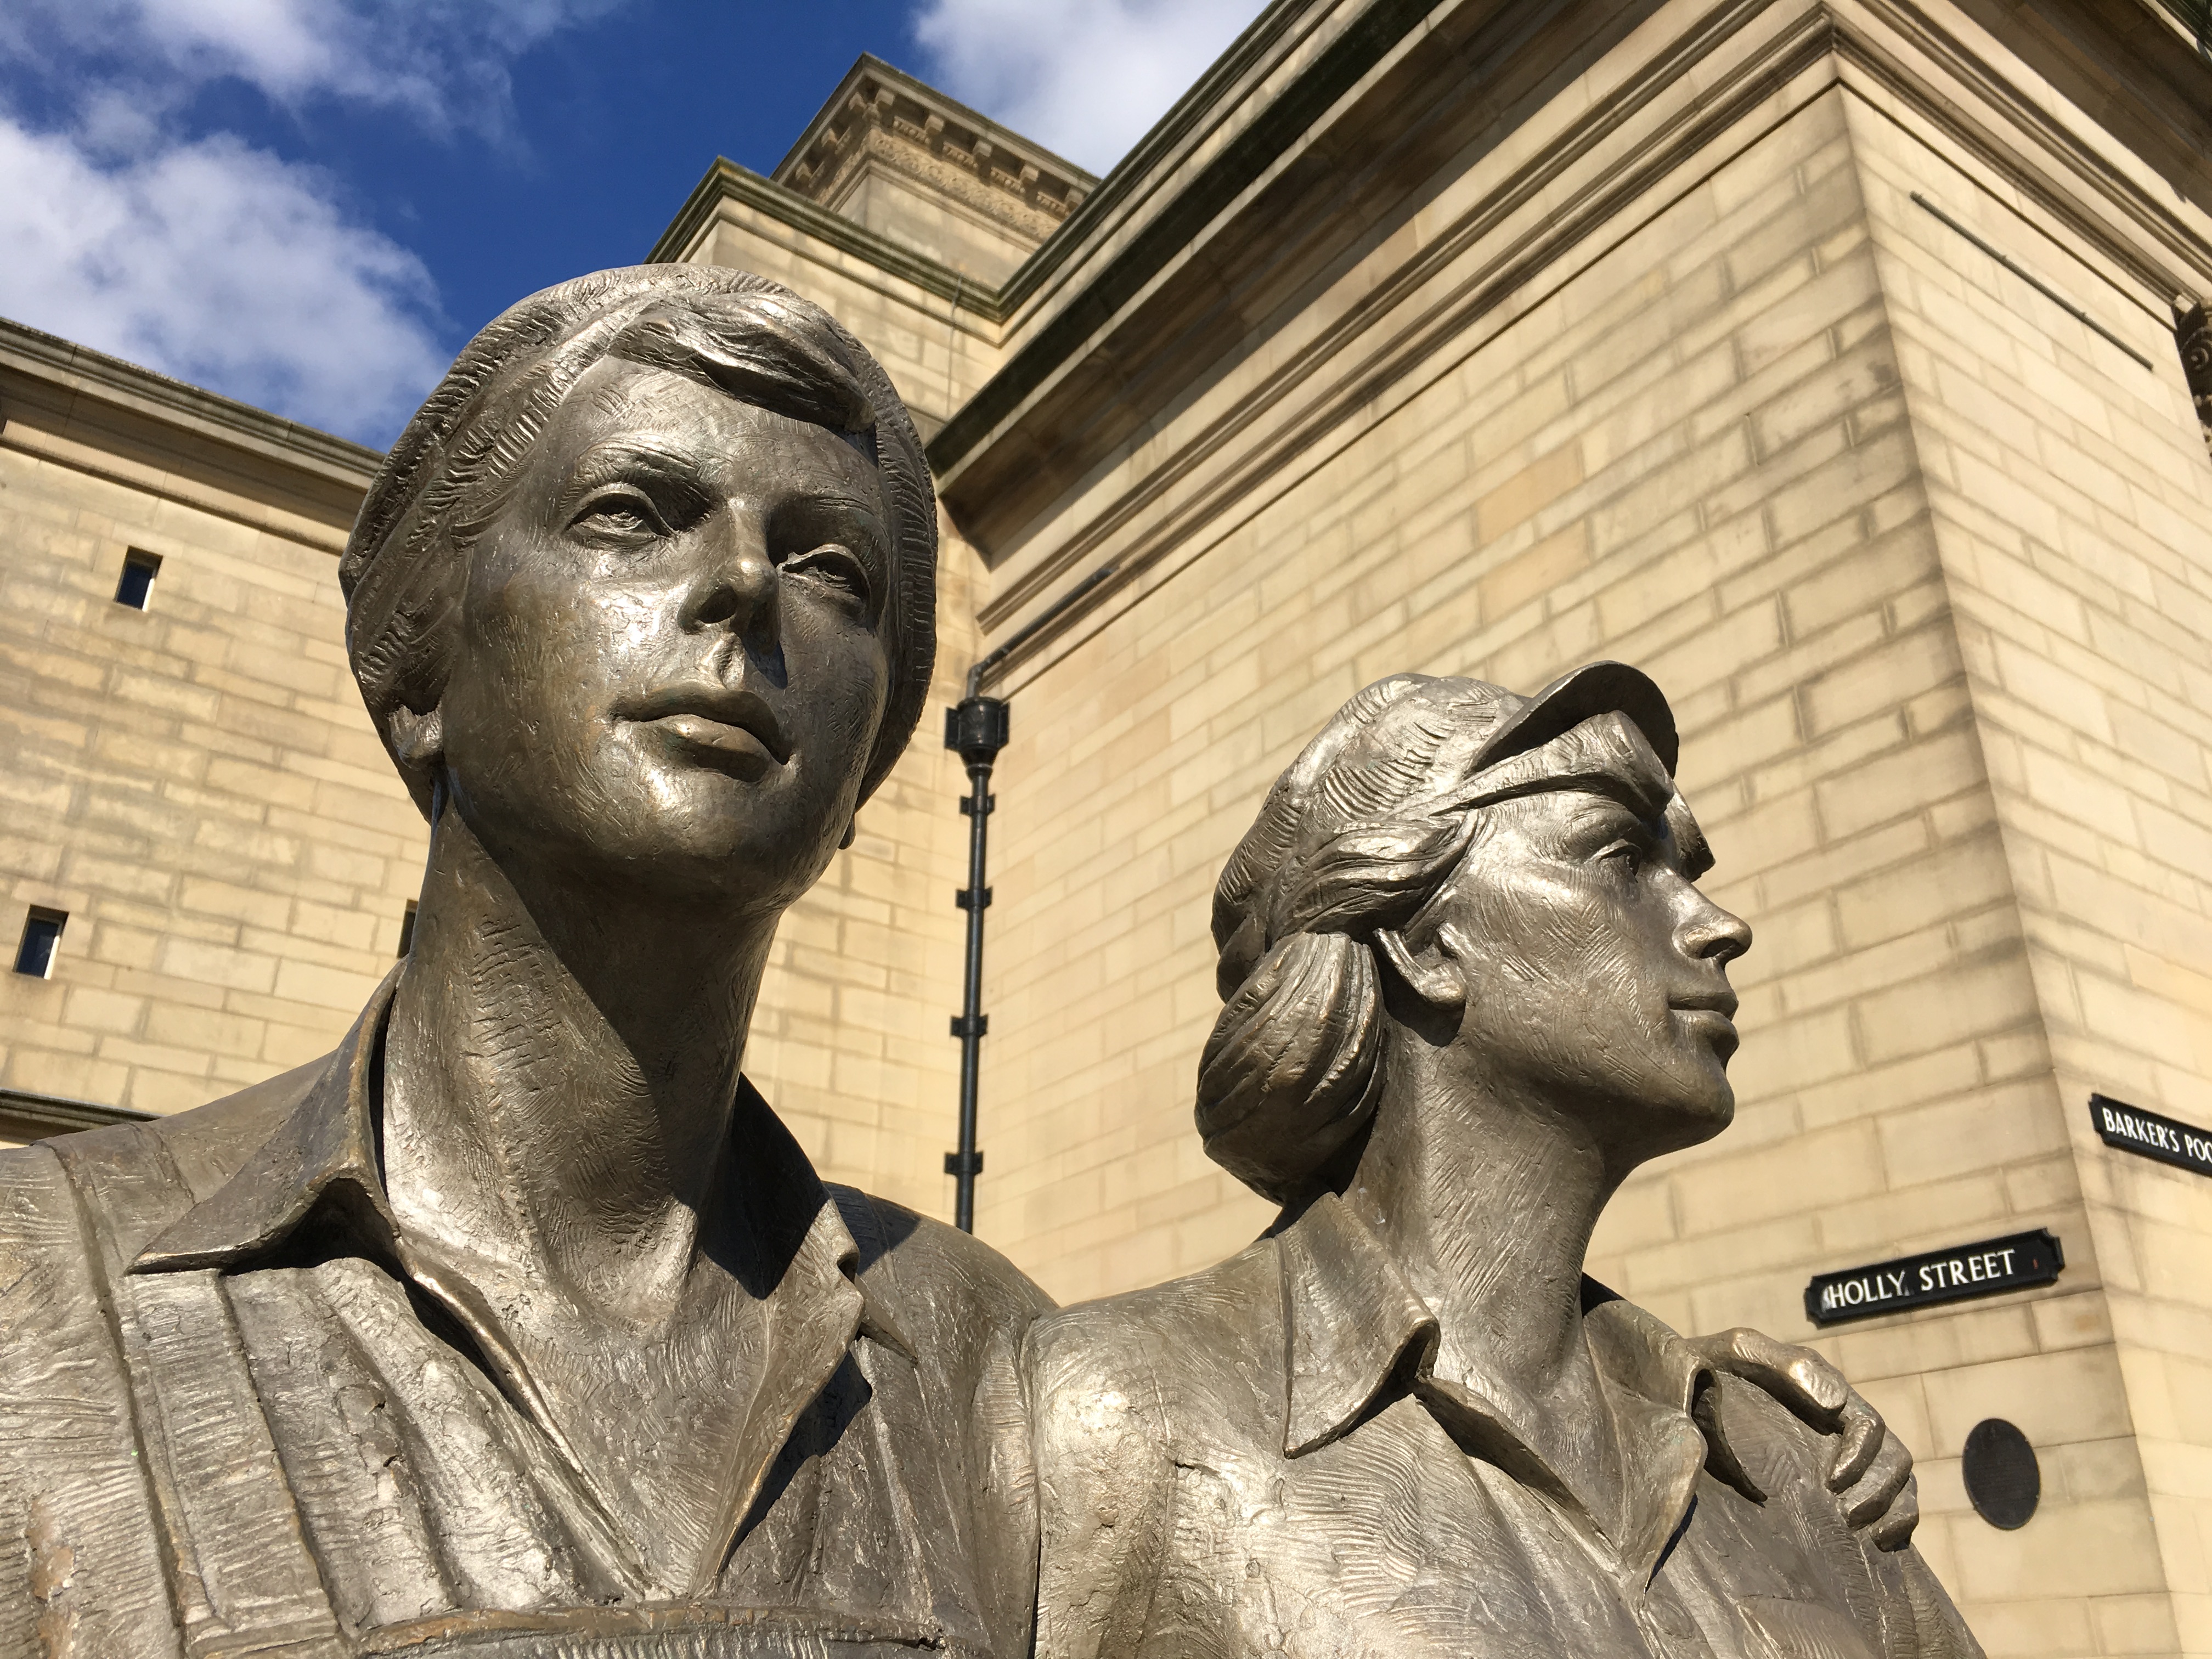 The bronze statue built to honour Sheffield's women metalworkers, to whom 'Operation Crucible' makes brief mention.